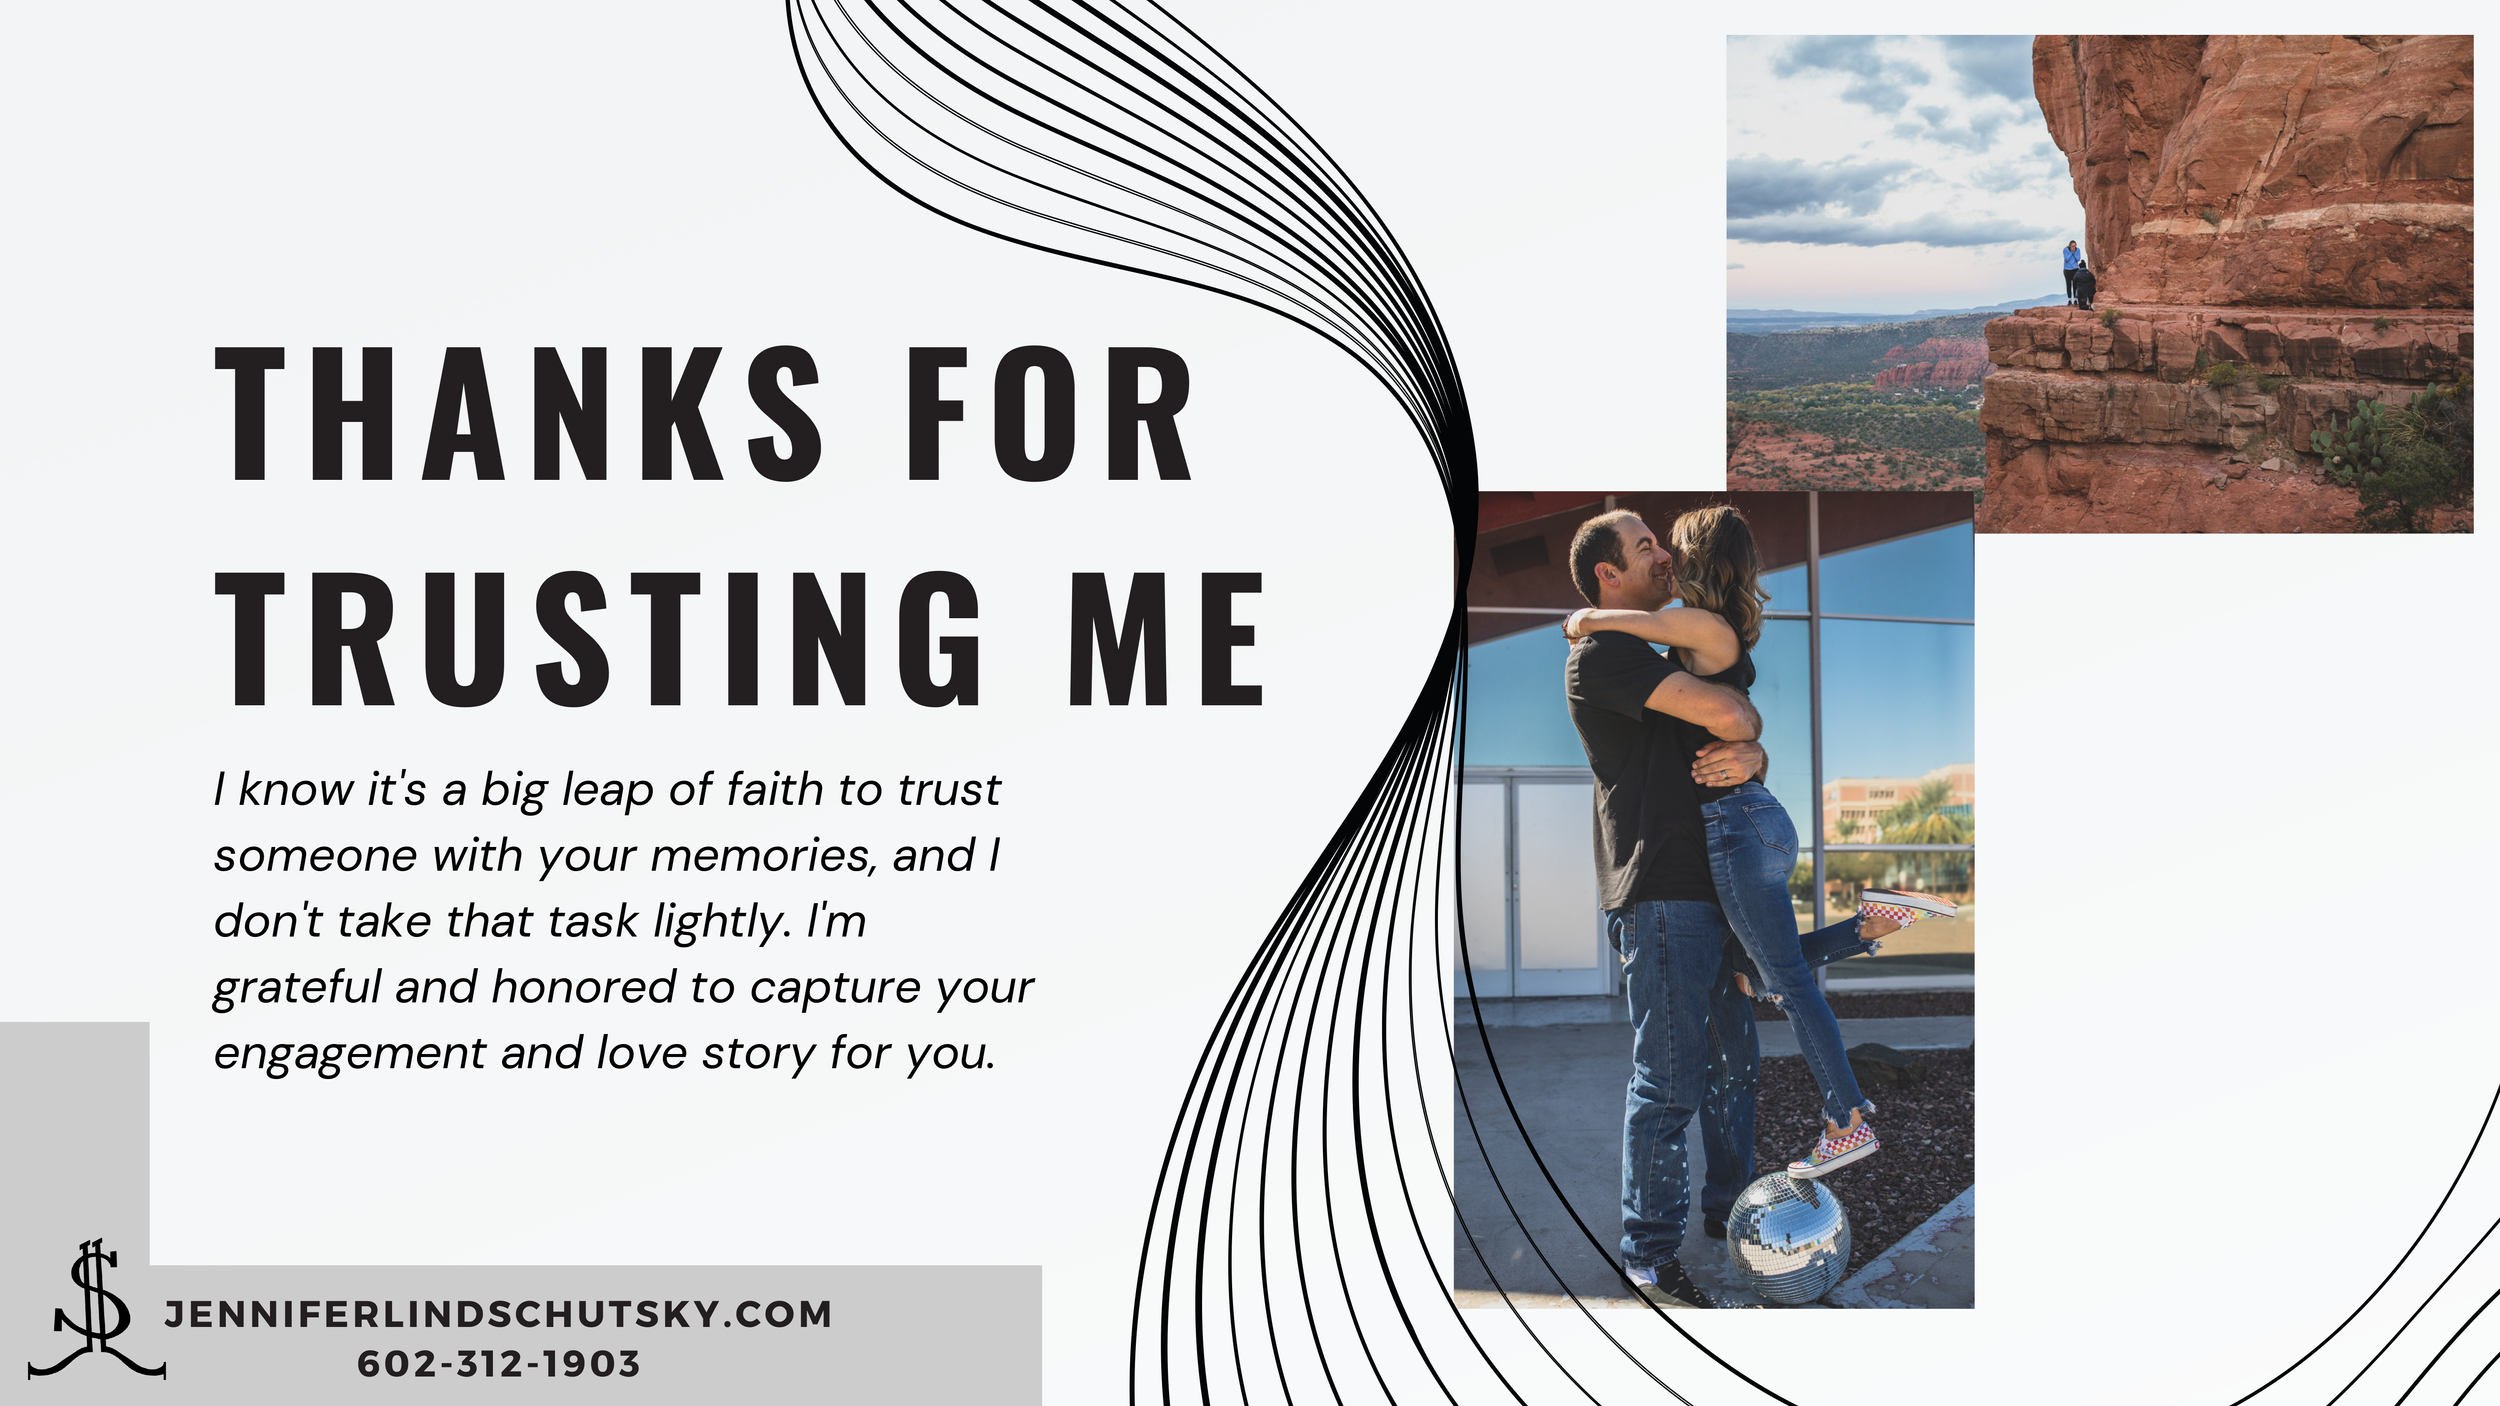 Engagement session guide and what to expect at your engagement photo session with Phoenix wedding photographer; Jennifer Lind Schutsky.